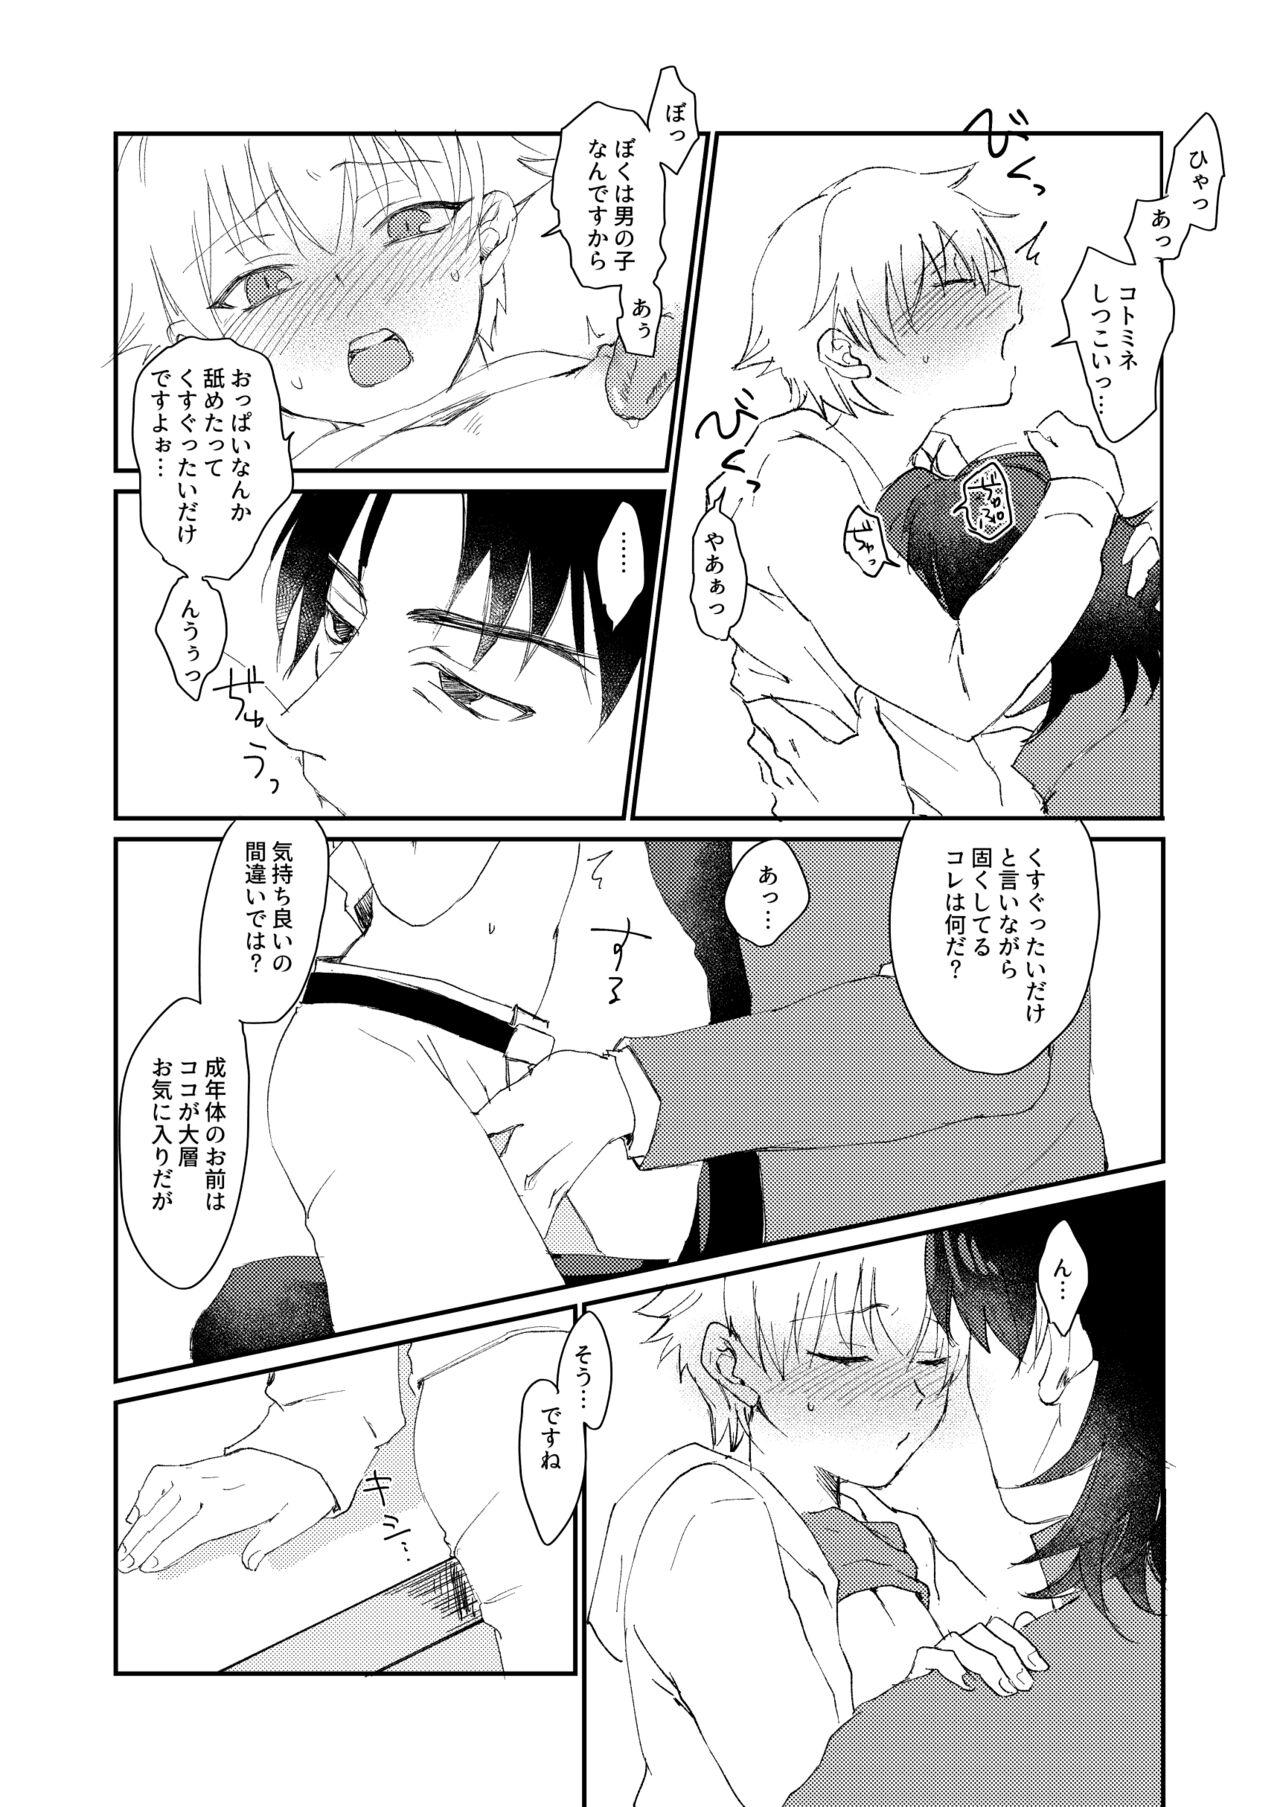 Petite Teenager ARE YOU KIDDING? - Fate zero Studs - Page 11